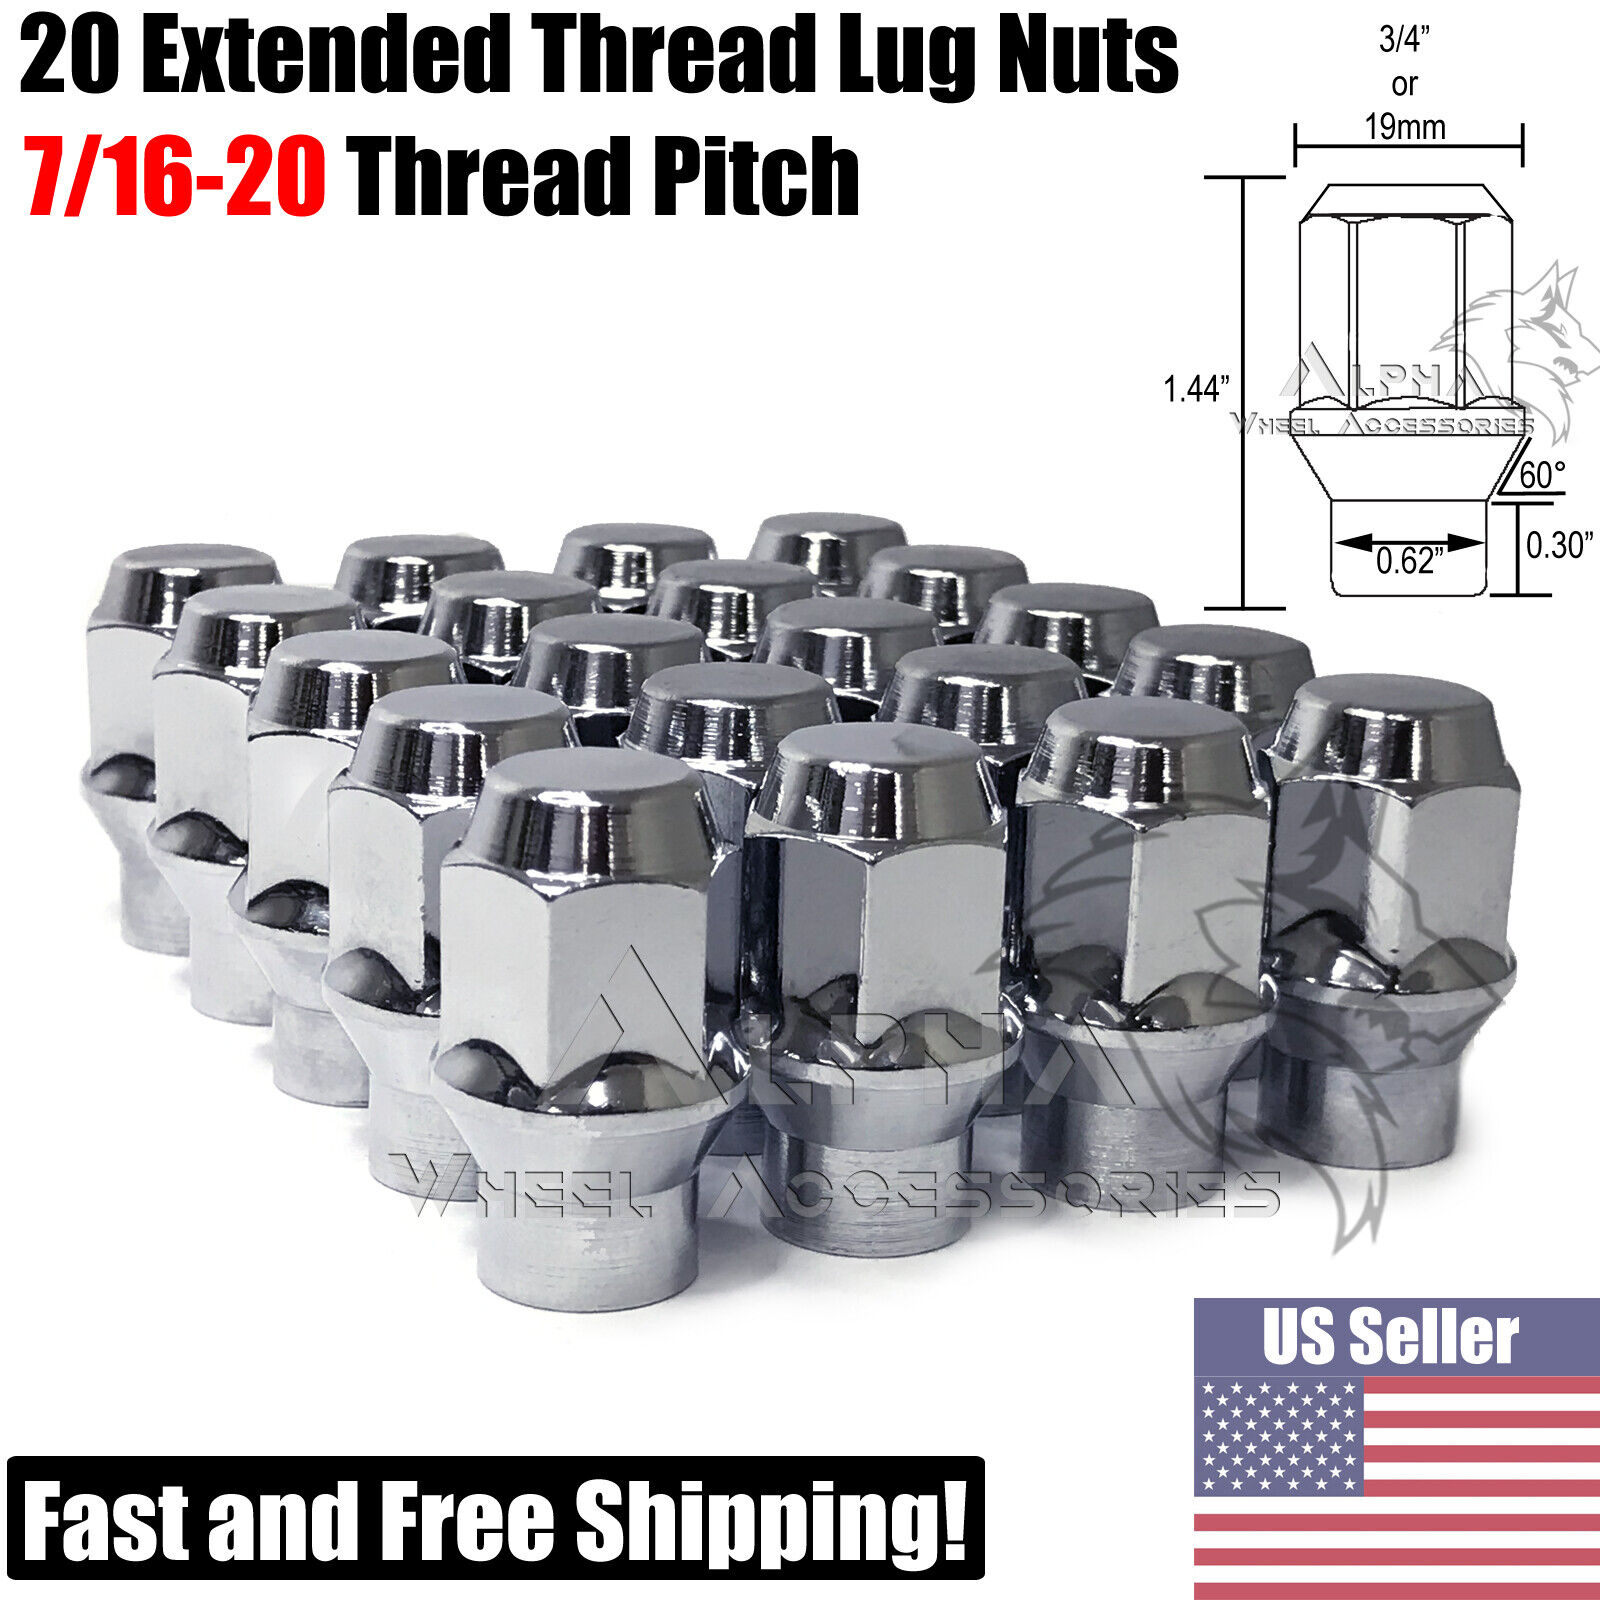 20 Chrome 7/16-20 Extended Thread Lug Nuts For Chevy Corvette Camaro Chevelle SS